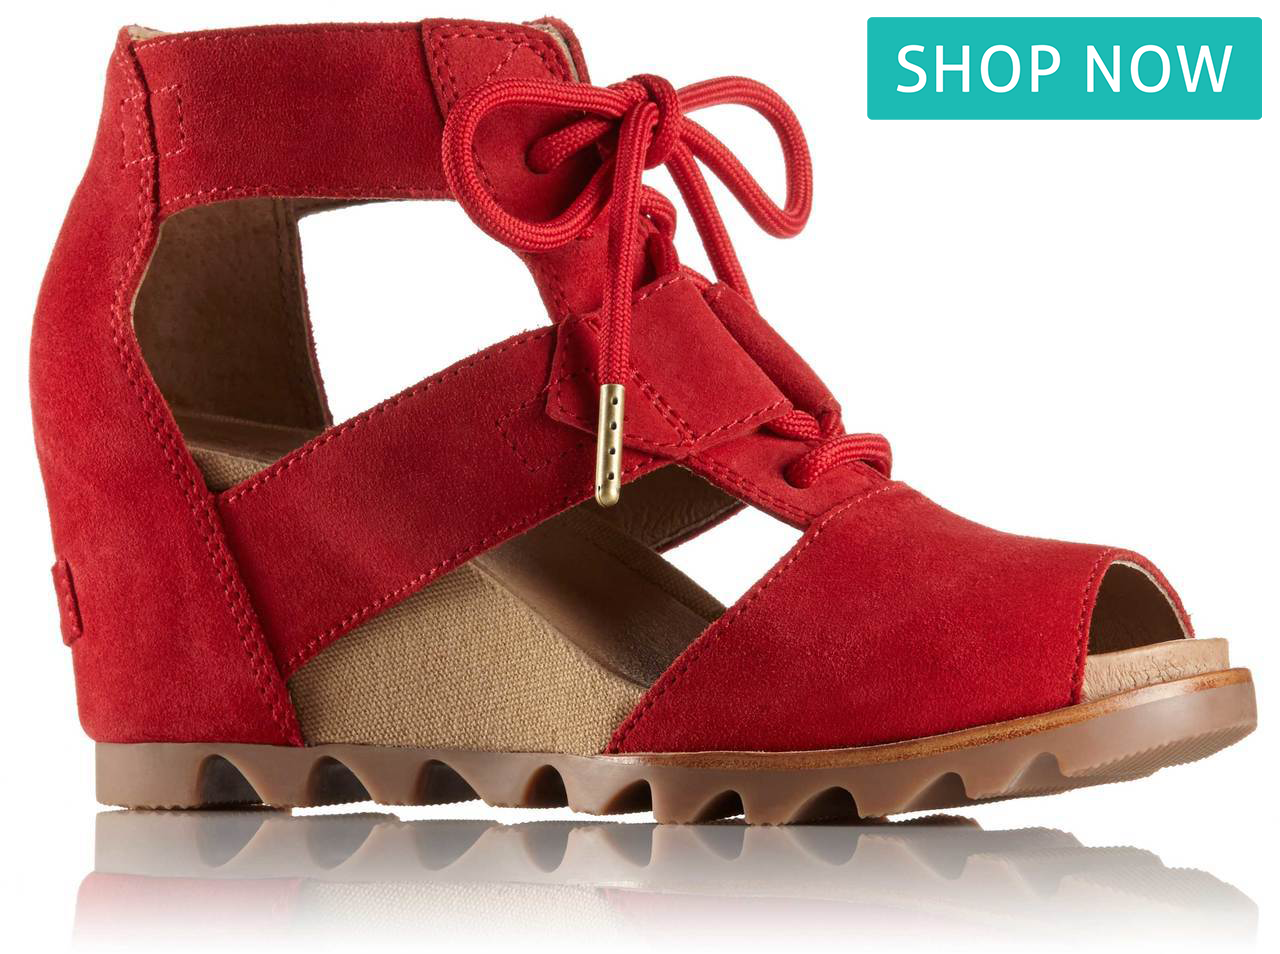 Sorel Joanie Lace in Bright Red